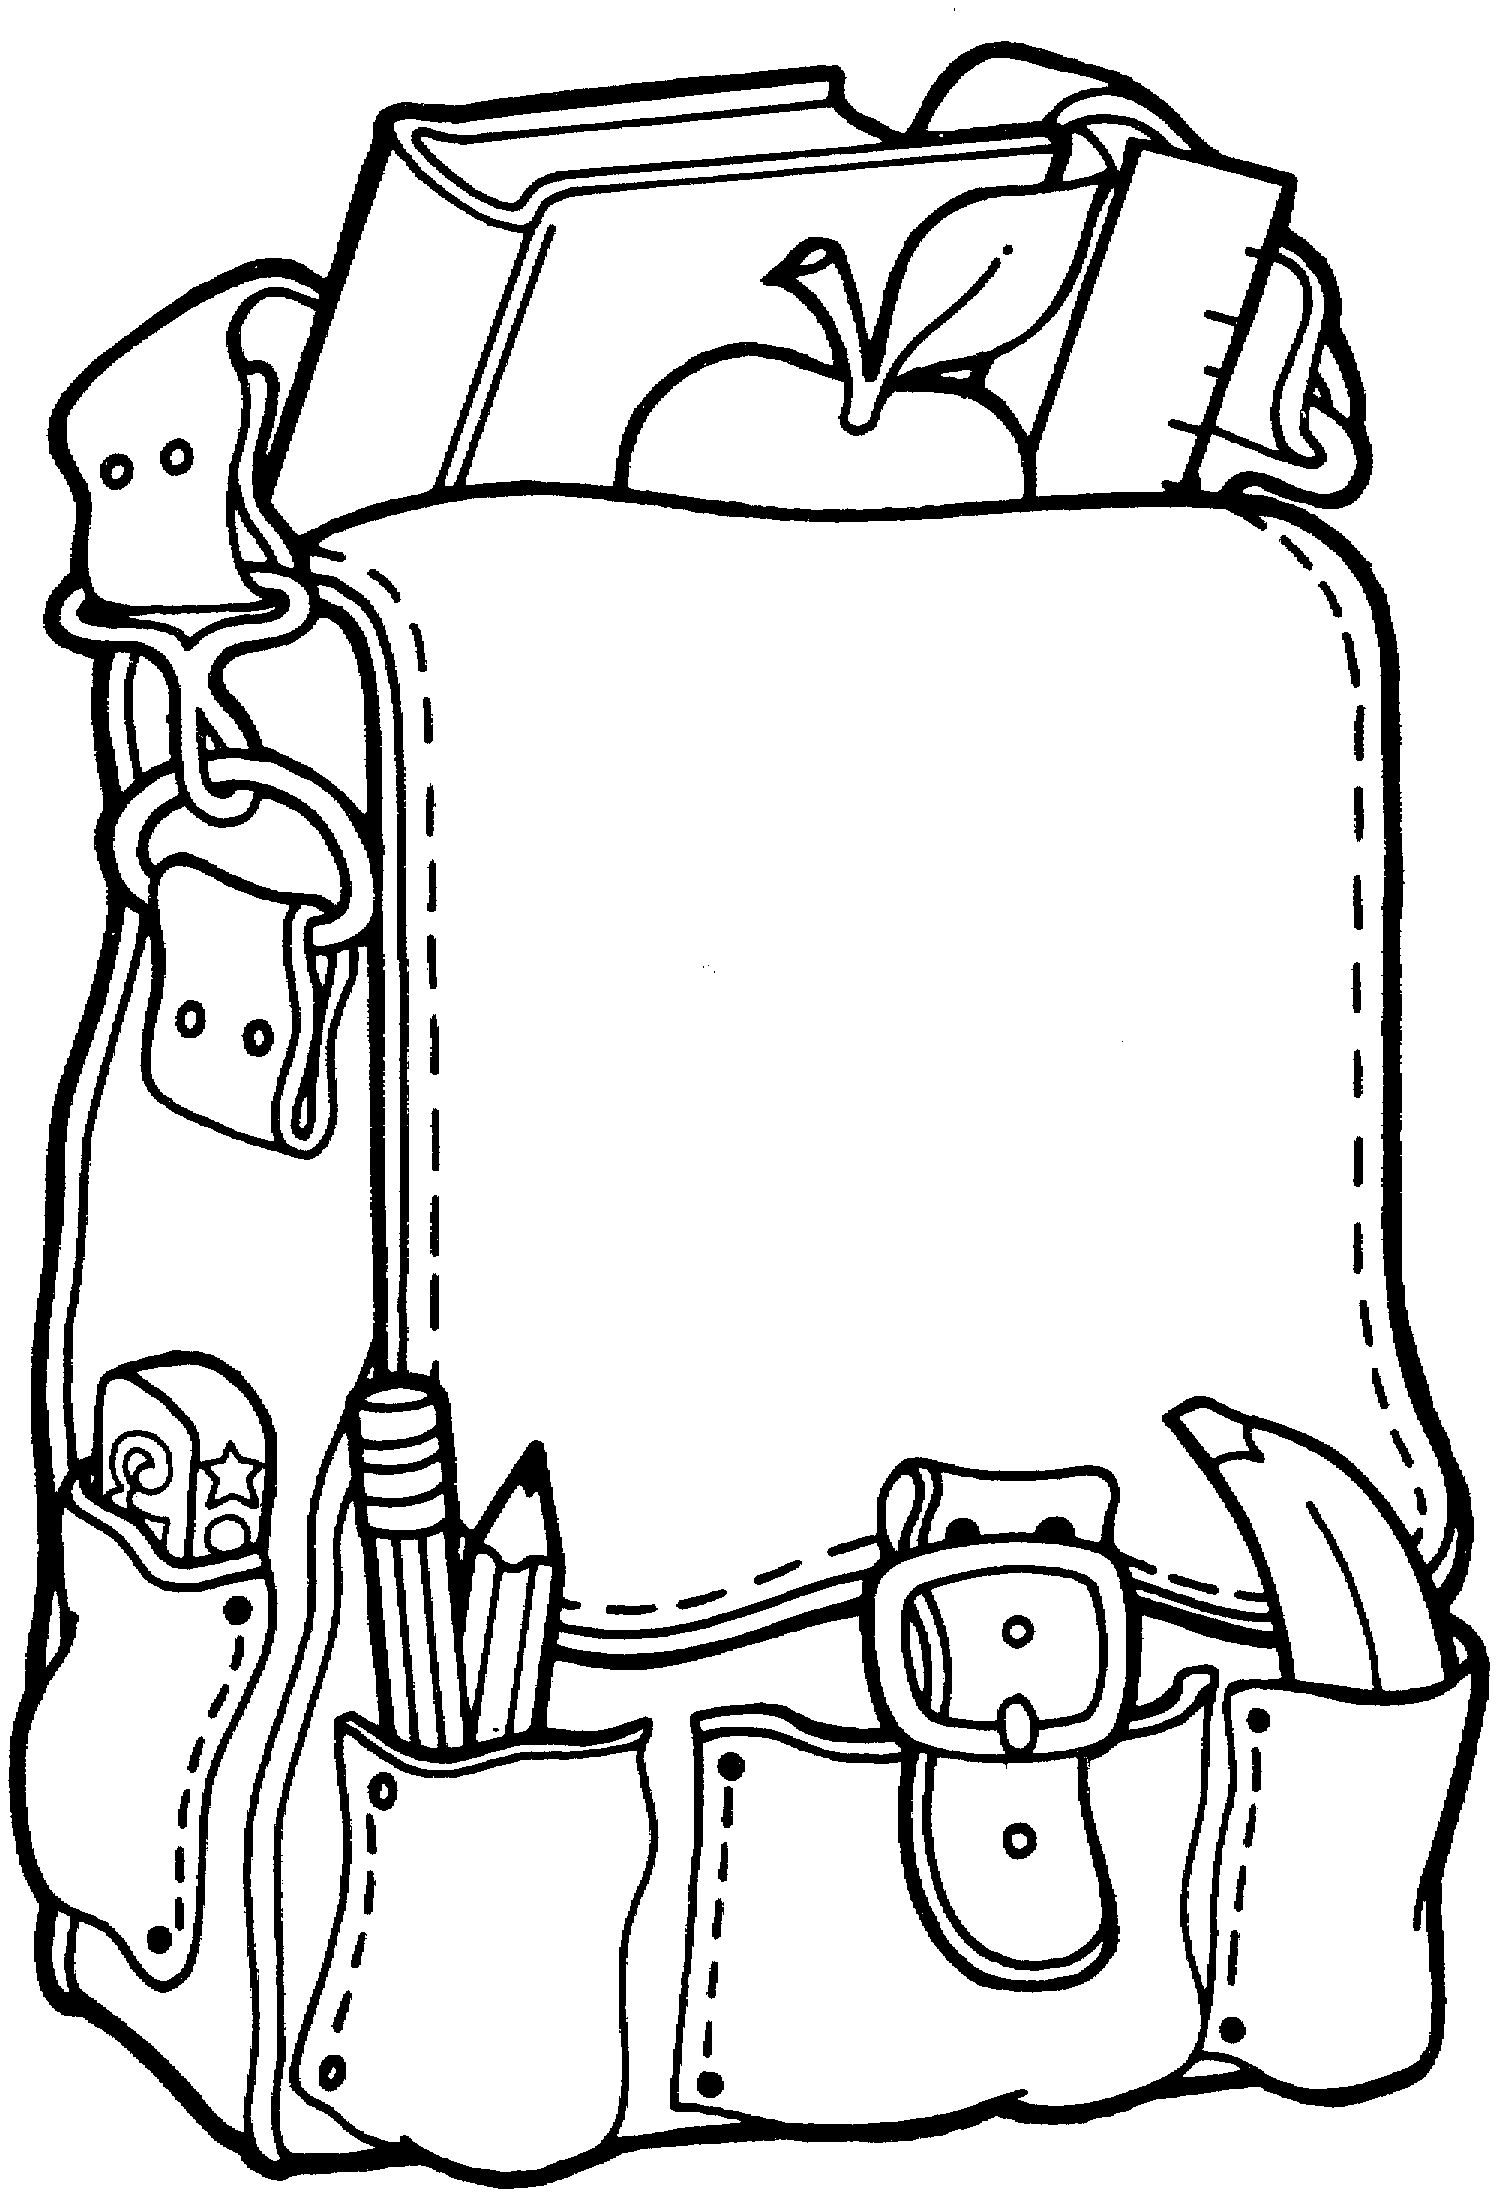 School coloring pages.